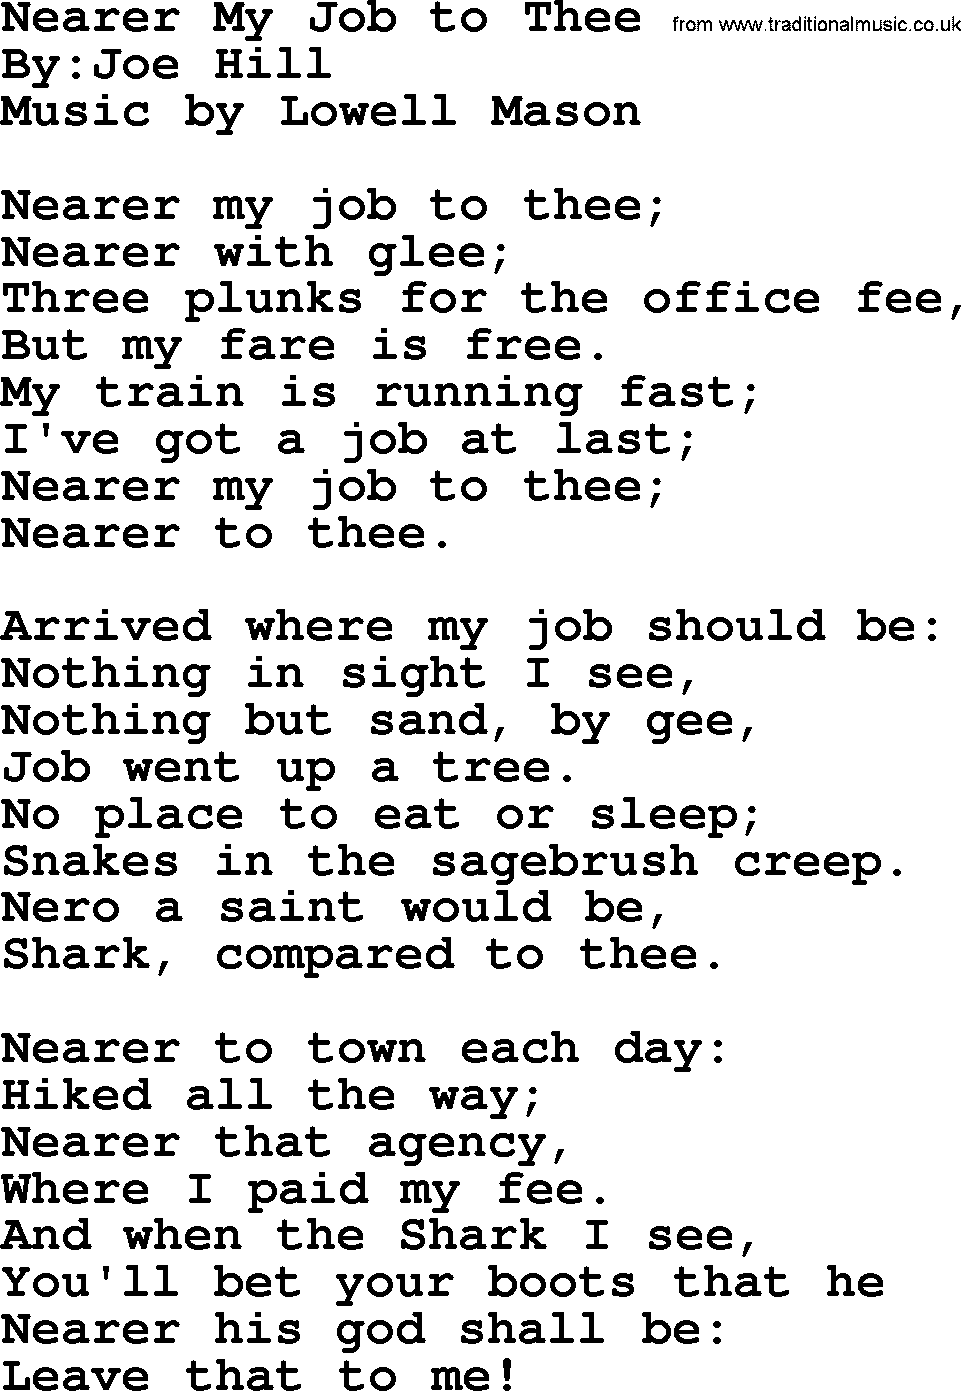 Political, Solidarity, Workers or Union song: Nearer My Job To Thee, lyrics